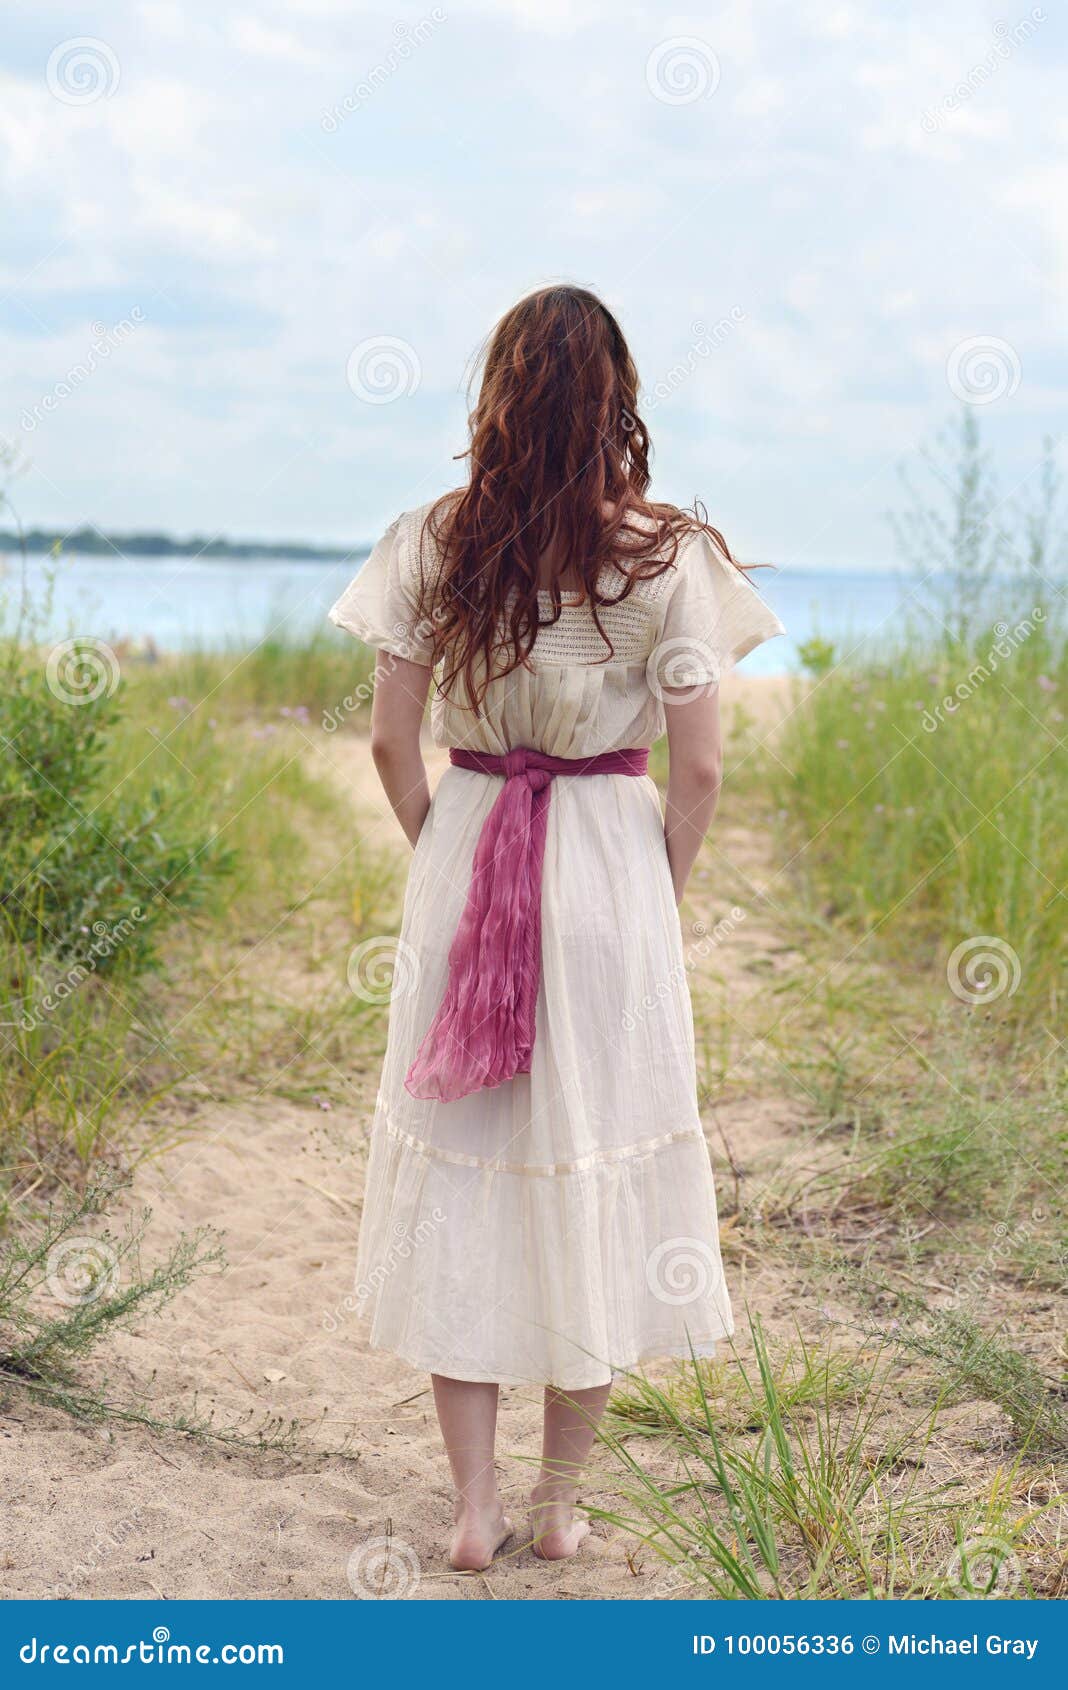 Back of Vintage Redhead Woman at the Beach with Bare Feet Stock Photo ...